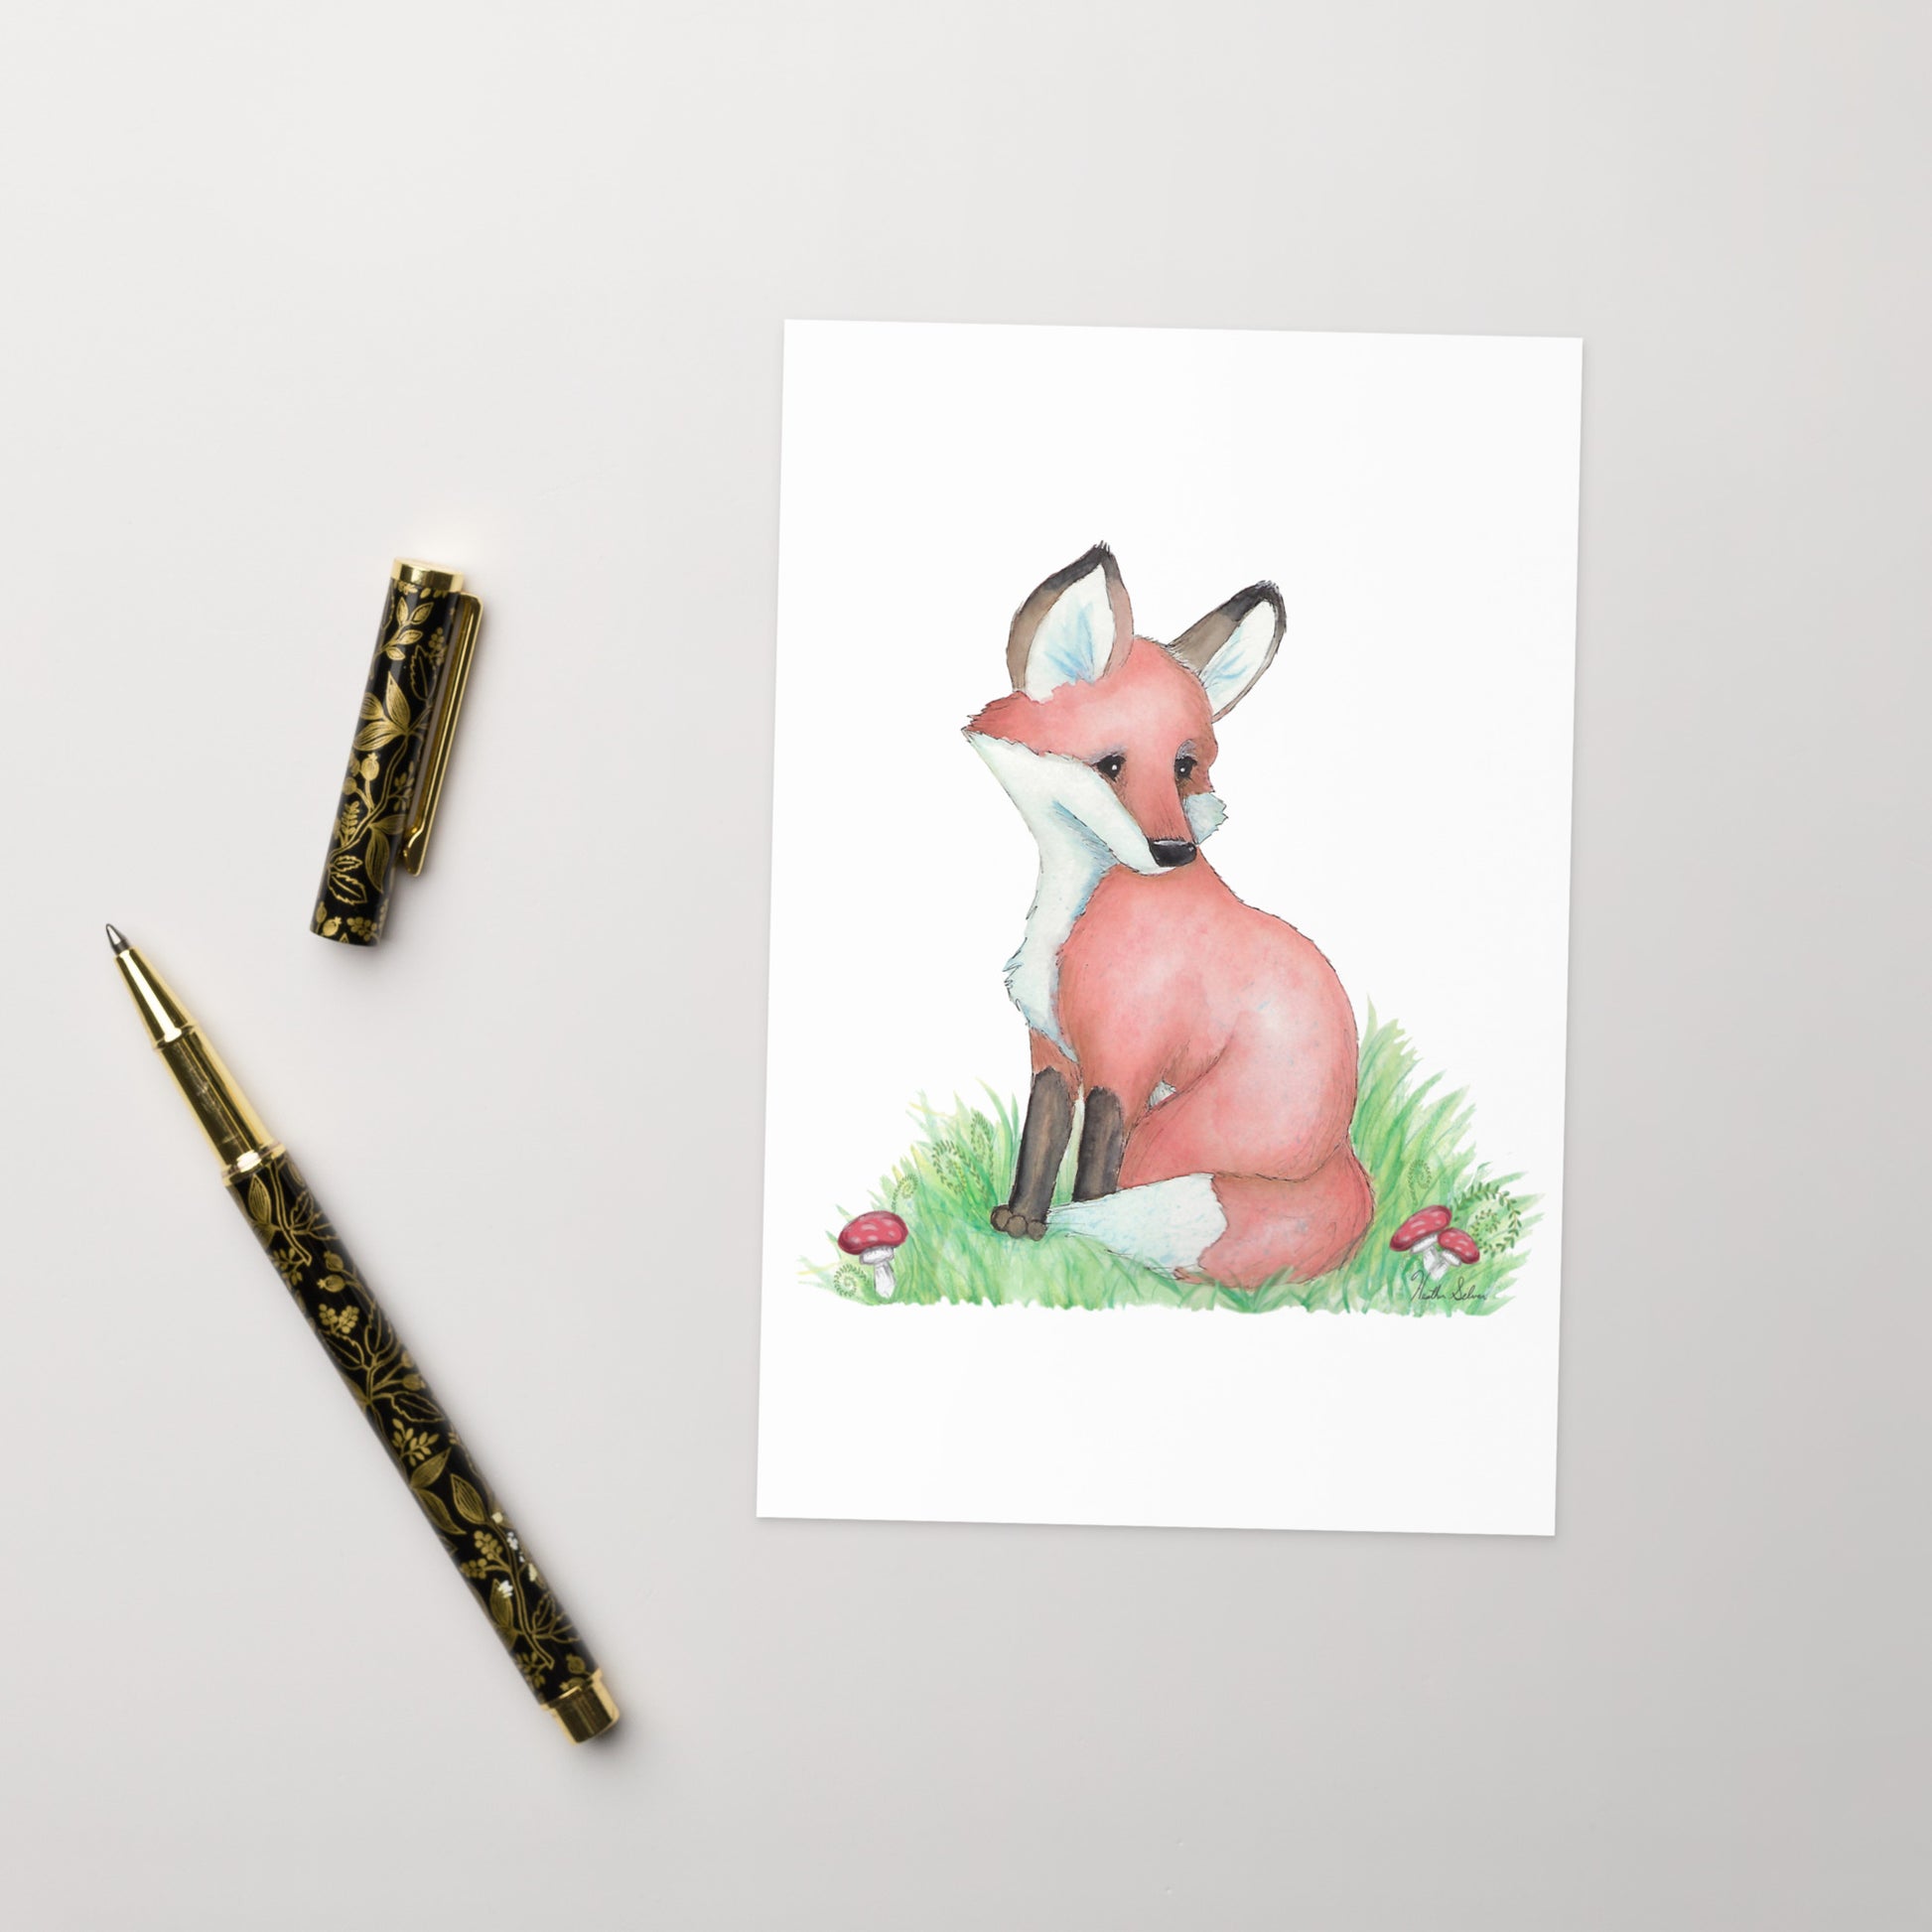 4 by 6 inch forest fox greeting card. Front has watercolor print of a fox in the grass by mushrooms and ferns. Inside is blank. Comes with a white envelope. Made of durable paperboard with vibrant printing. Shown on tabletop by pen.